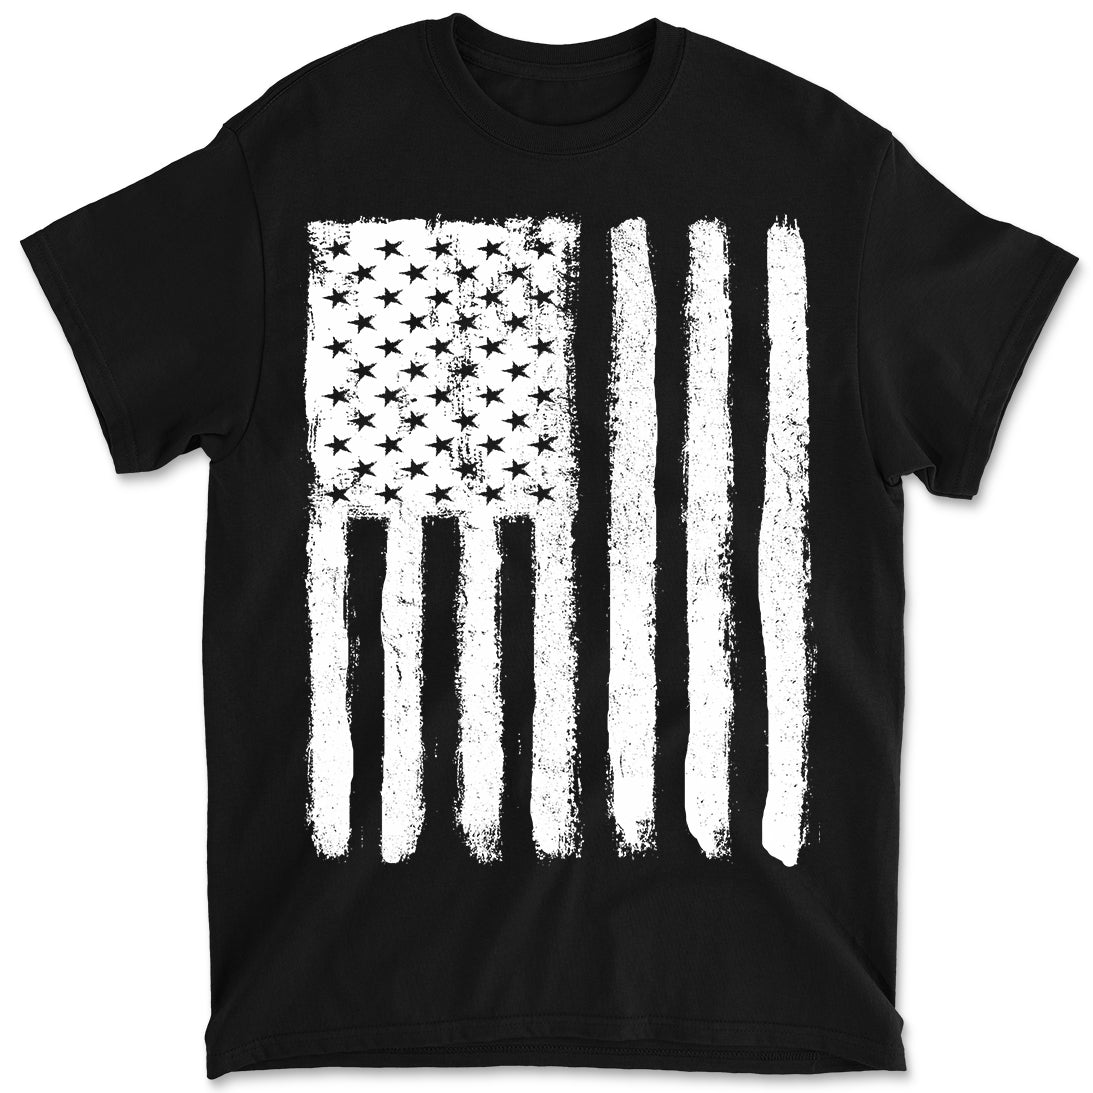 American Flag Distressed White Men's 4th Of July Graphic Tee